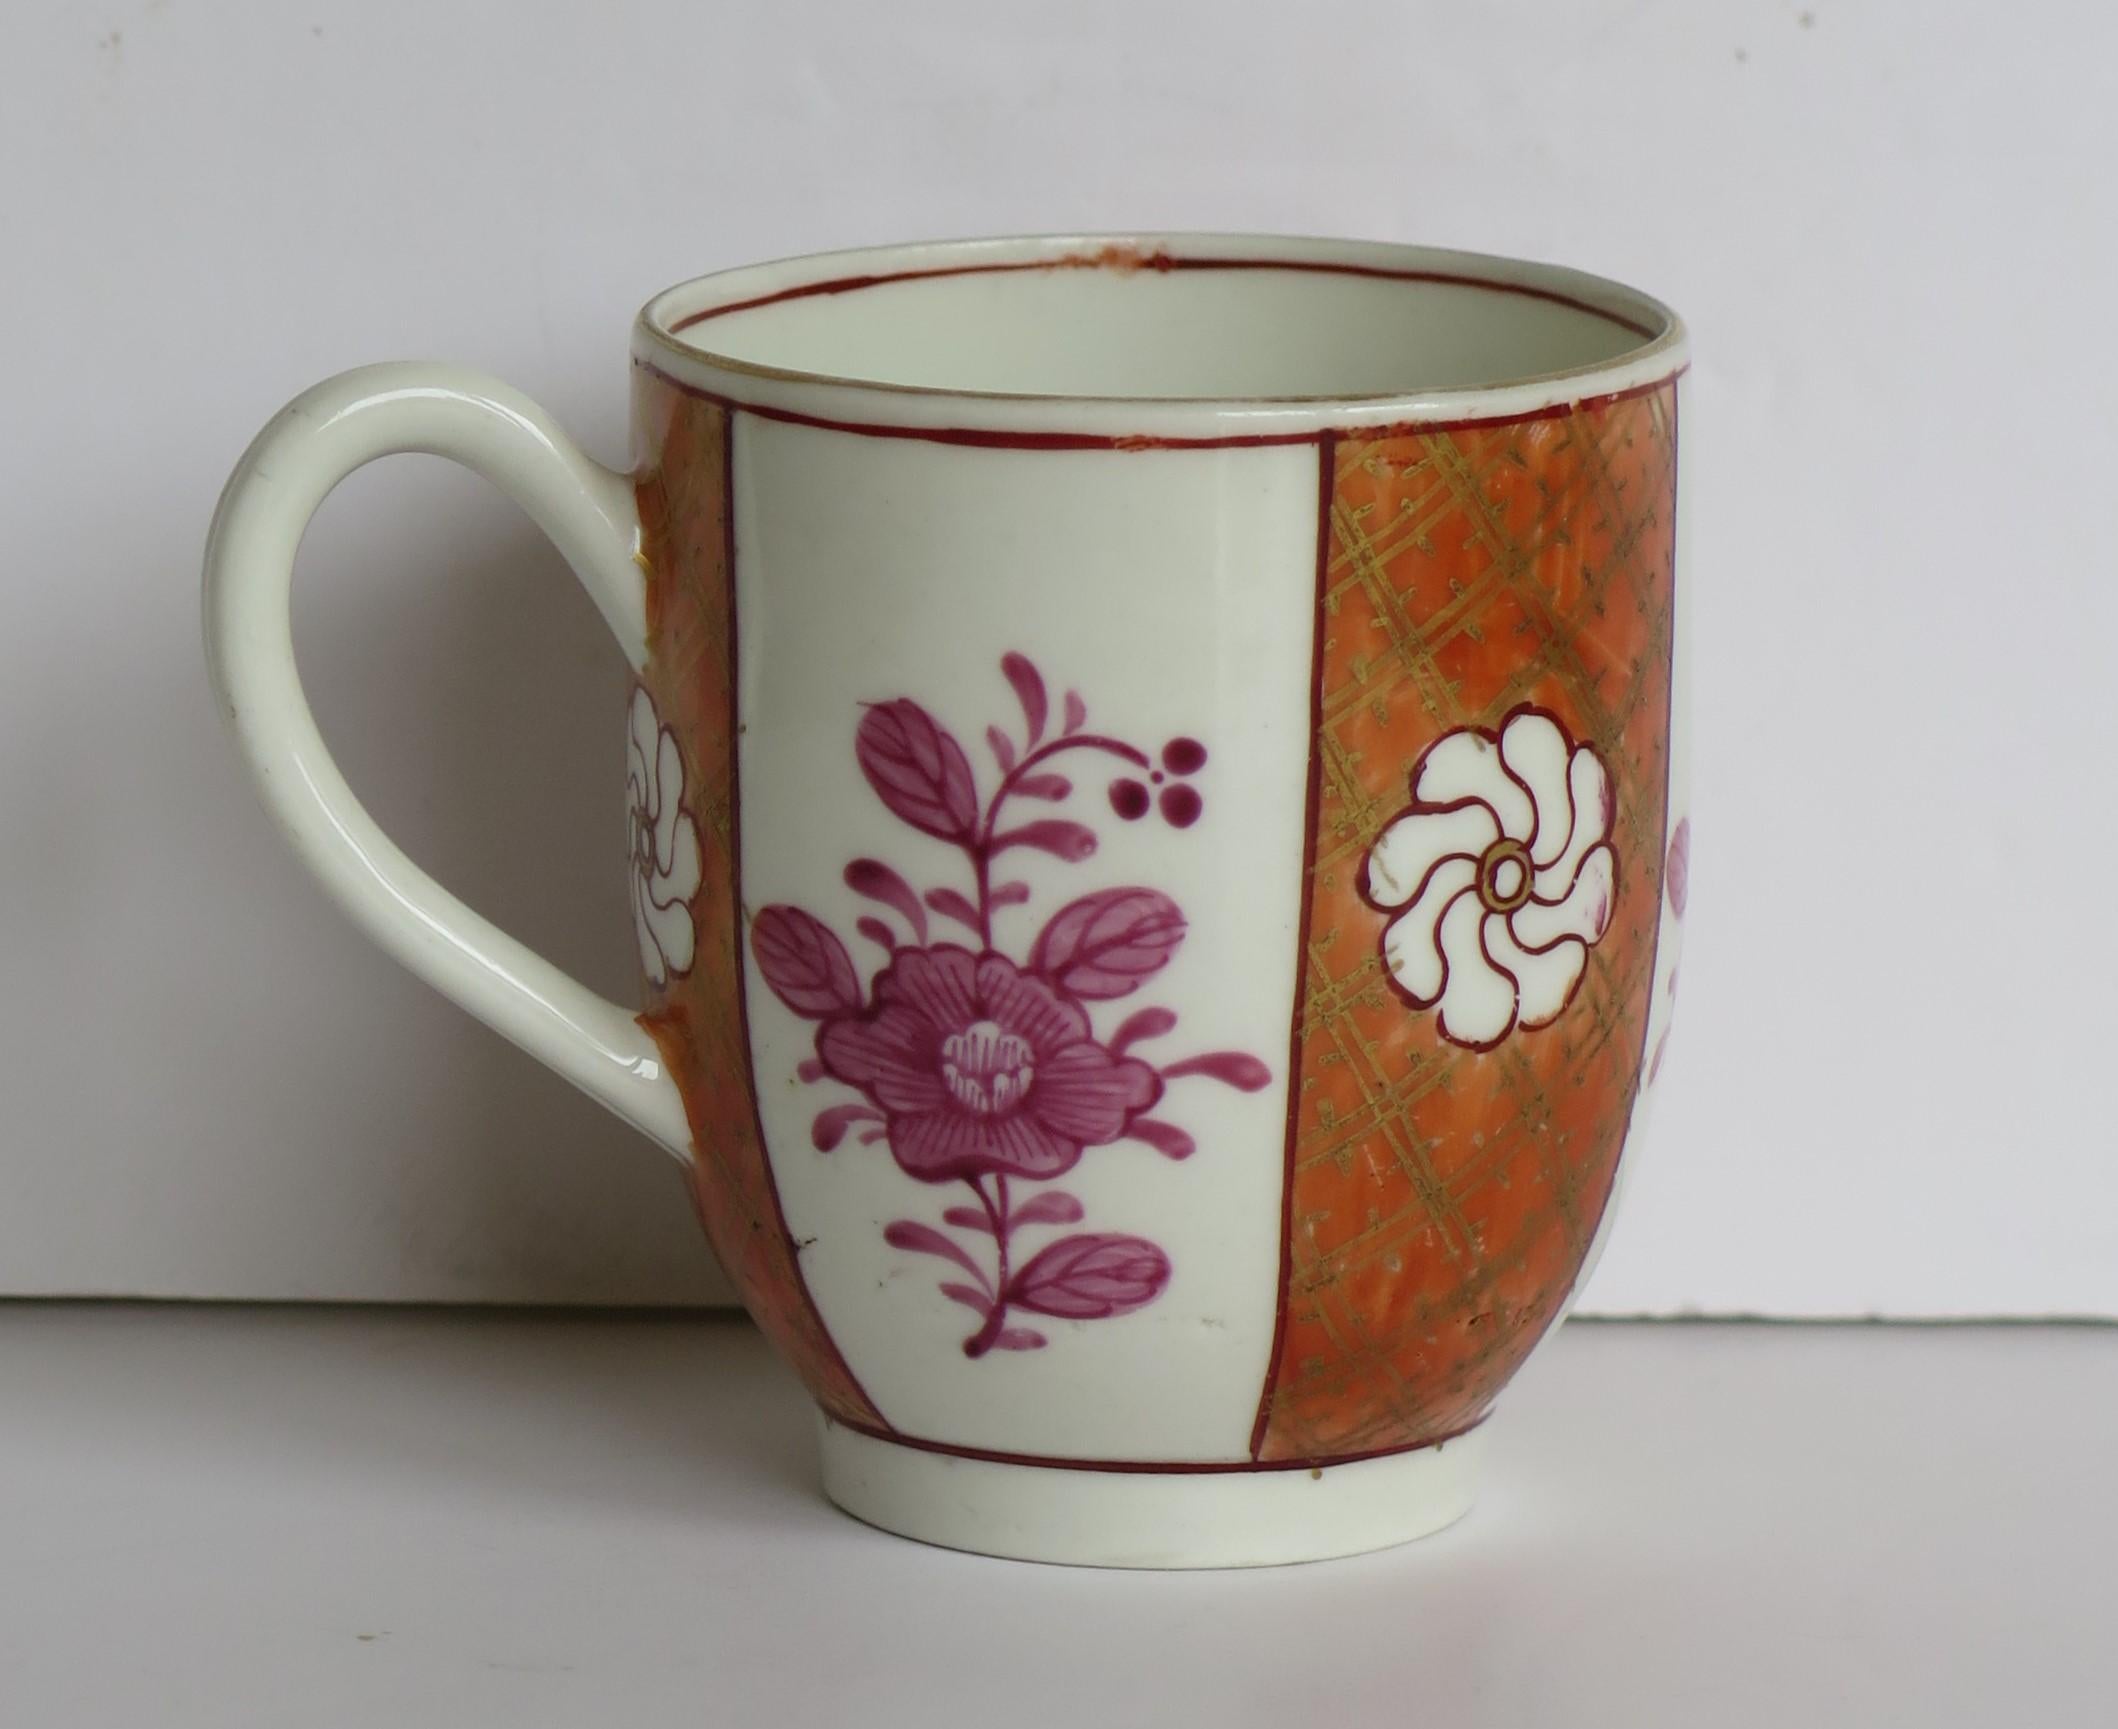 This is a rare first period (or Dr. Wall) Worcester Coffee Cup, with a distinctive hand painted pattern, made of porcelain and dating to the 18th century, circa 1770.

The cup is well potted with a grooved loop handle 

This delightful early